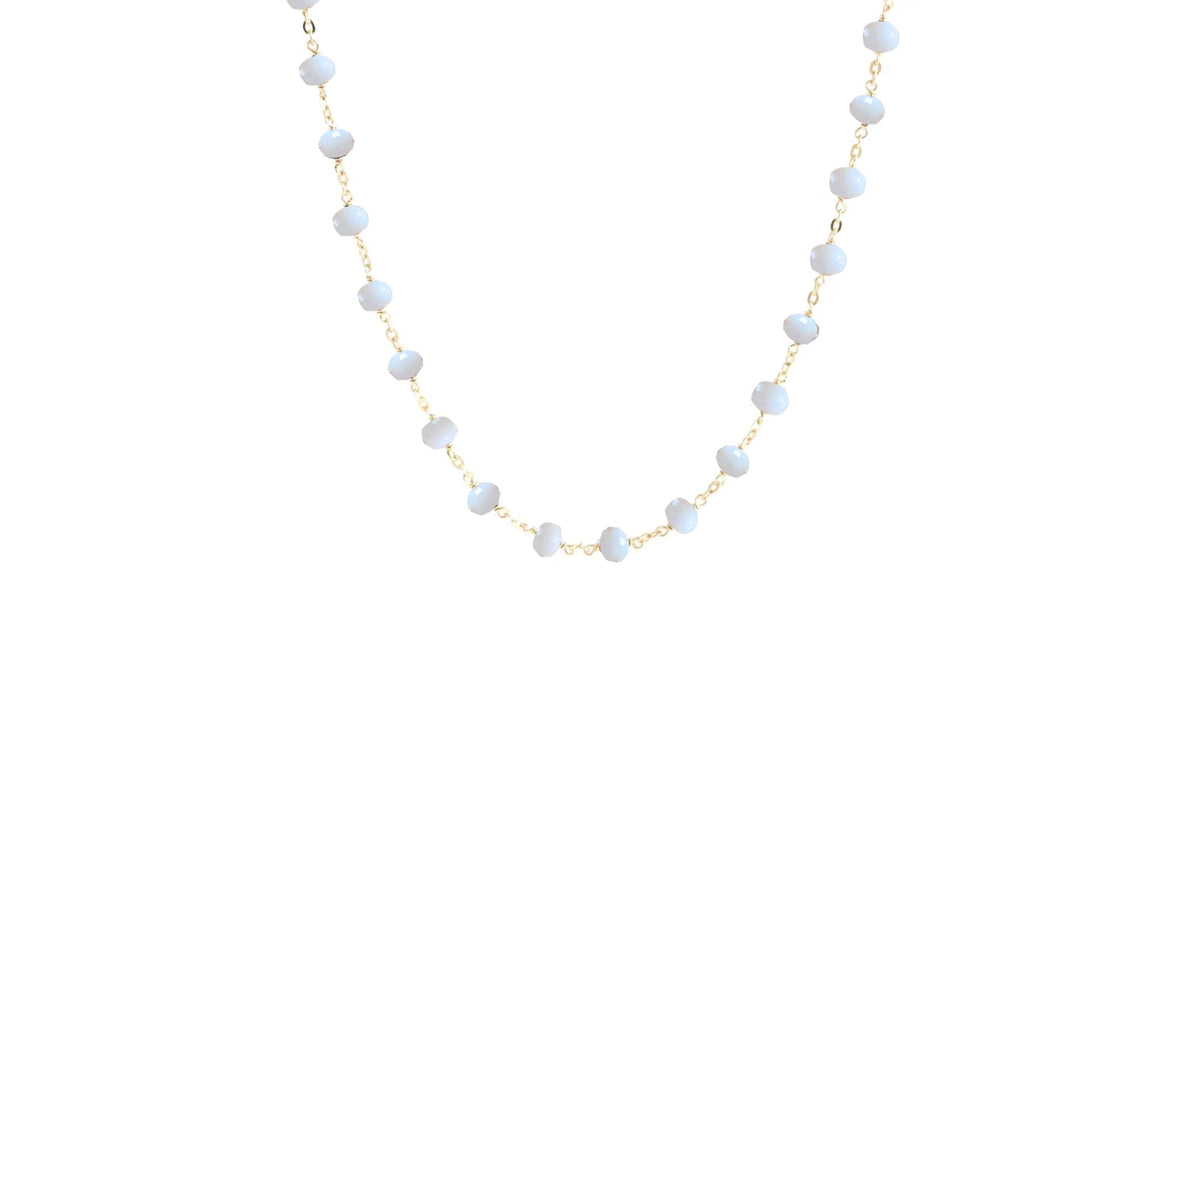 ICONIC SHORT BEADED NECKLACE - ARCTIC BLUE OPAL &amp; GOLD 16-20&quot; - SO PRETTY CARA COTTER